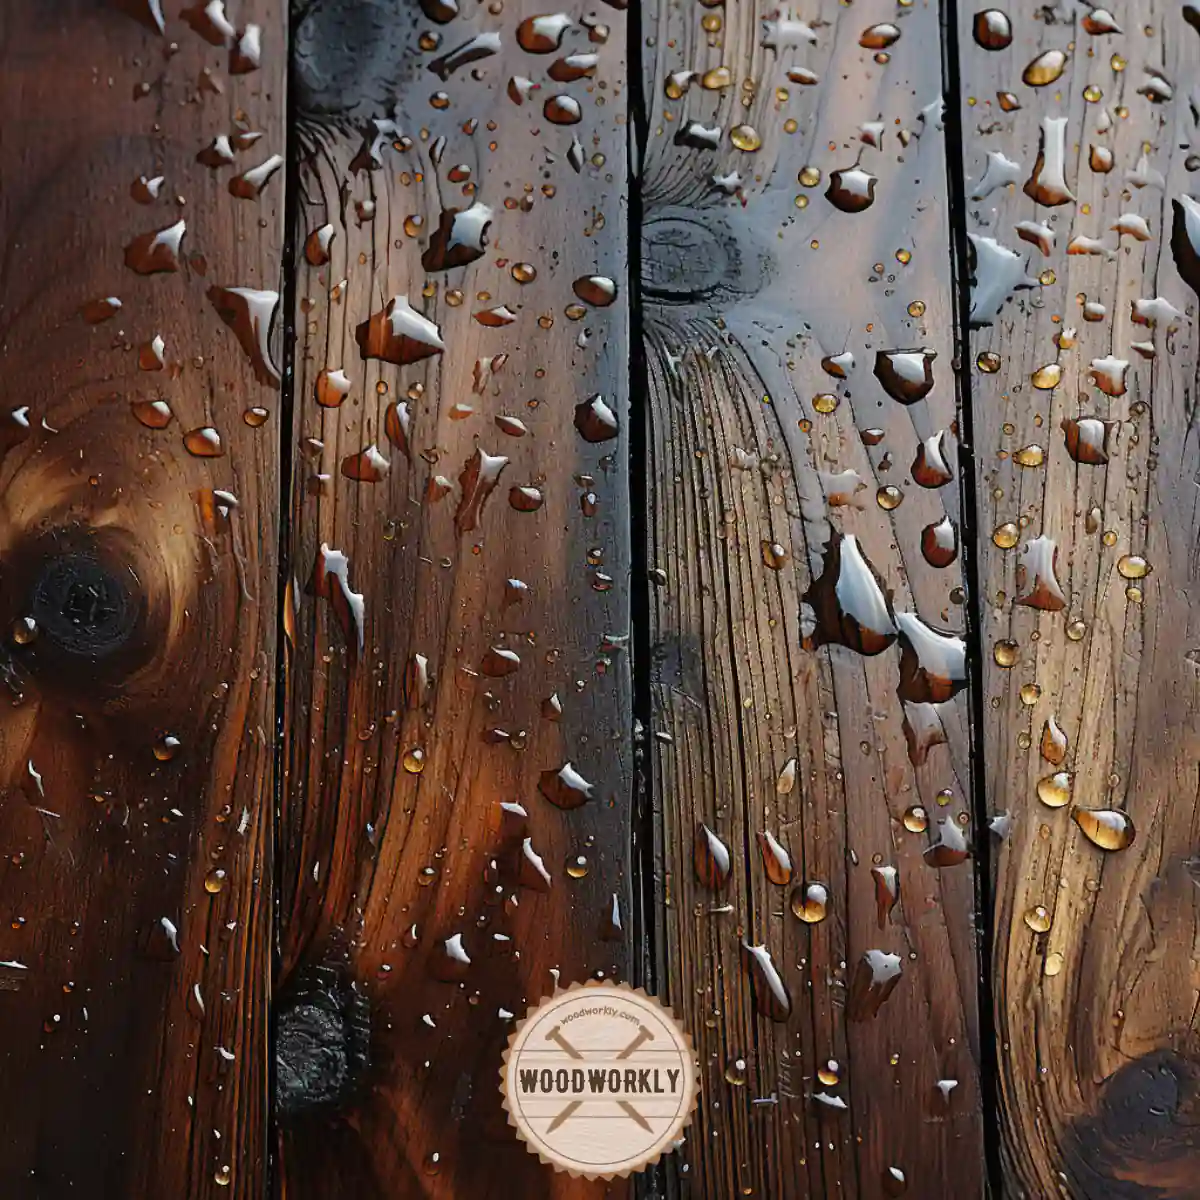 Wet wood surface